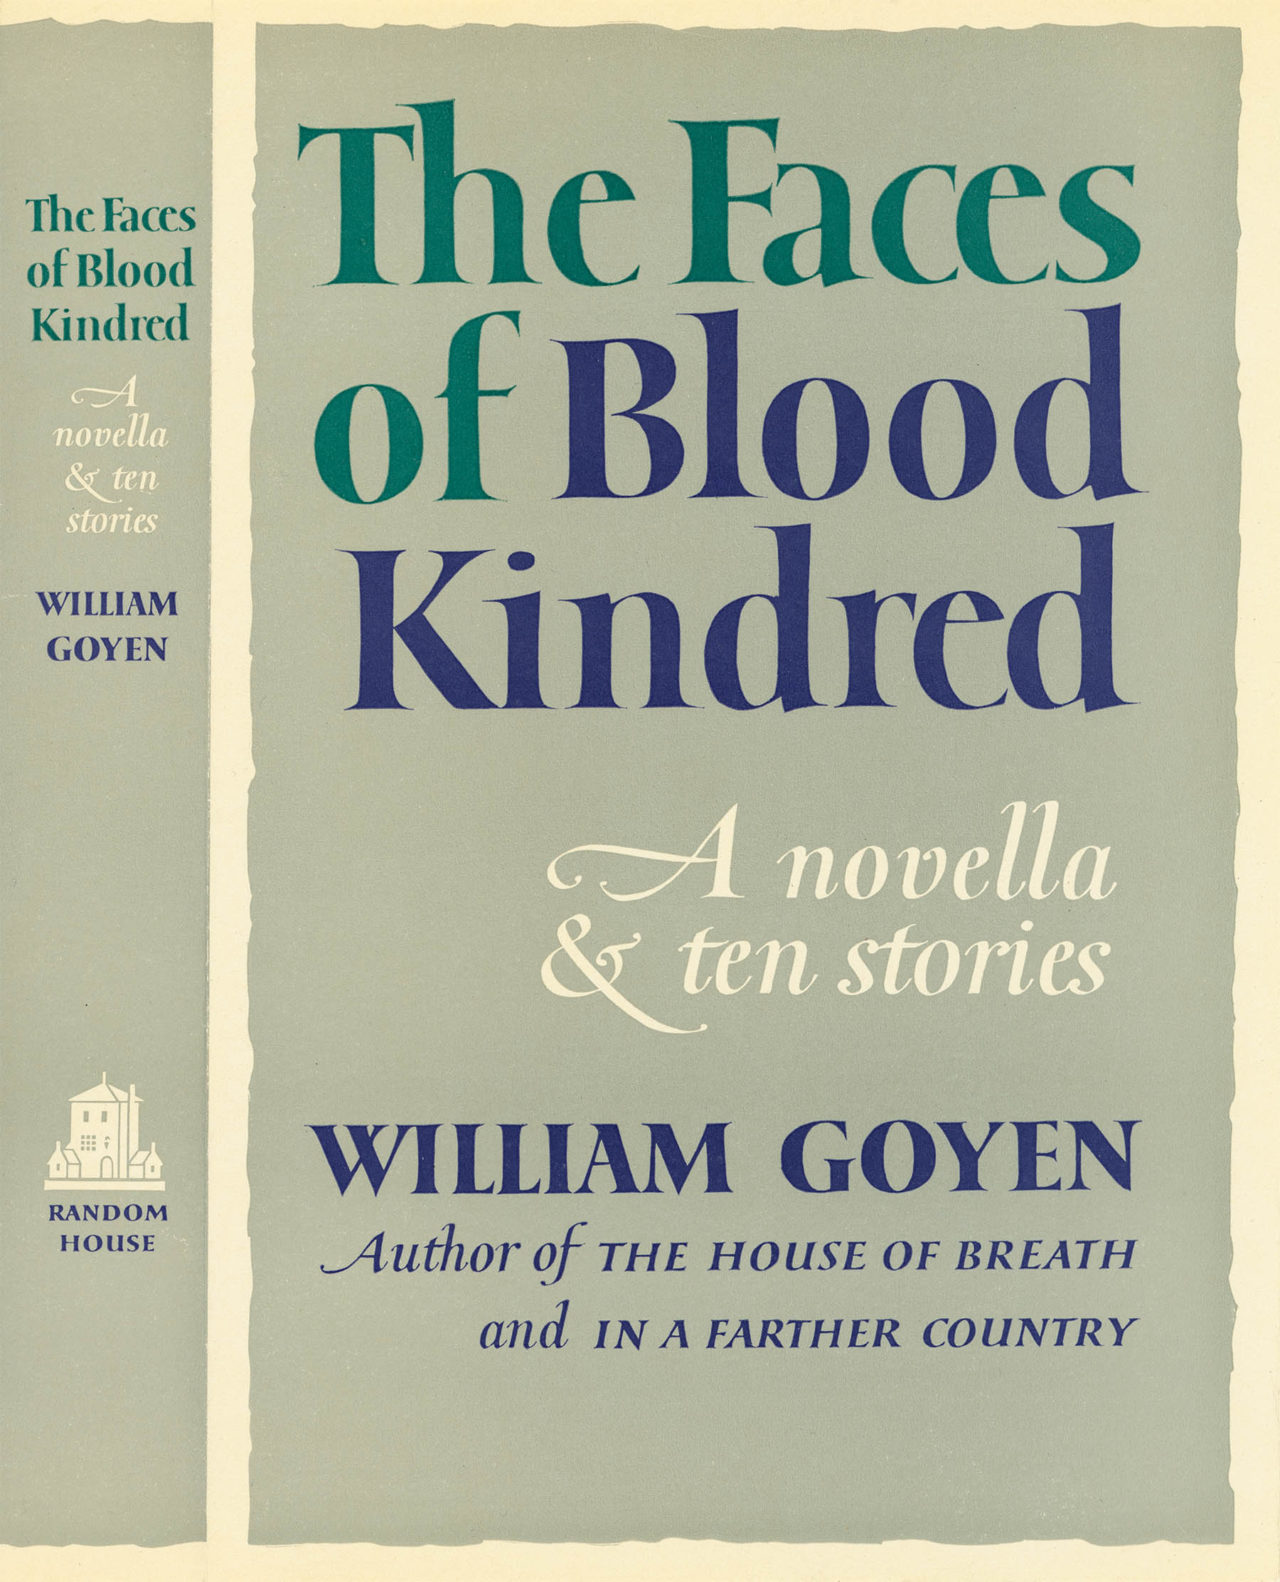 Book jacket of The Faces of Blood Kindred